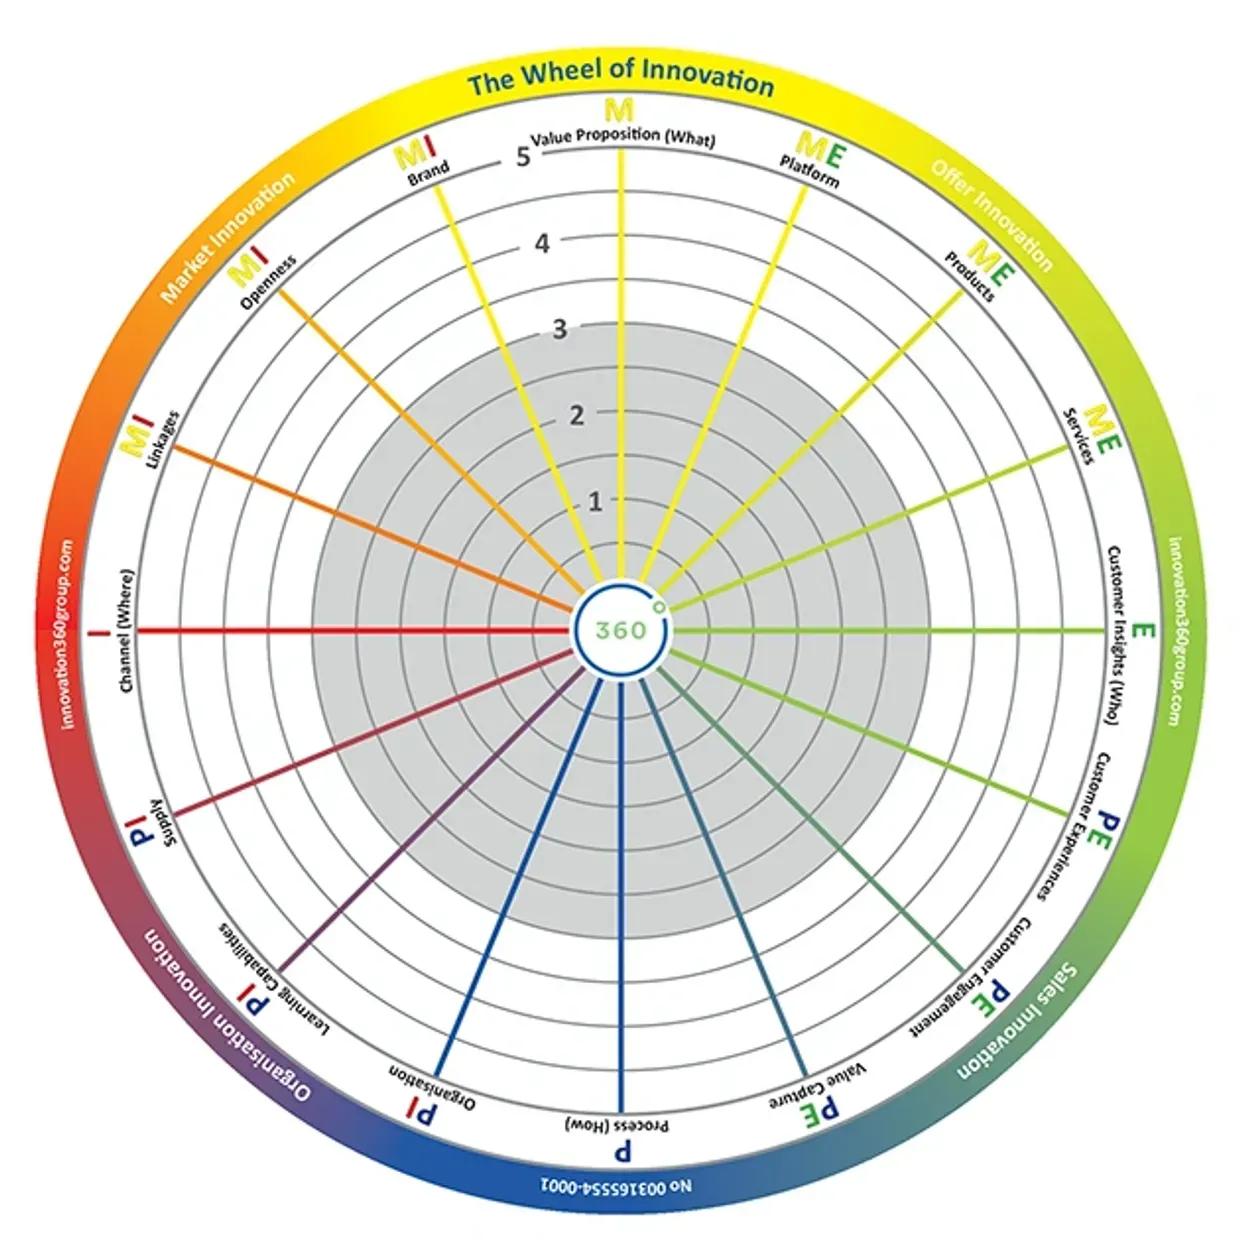 A "radar chart" type template with space for 5 capability levels across 16 topics